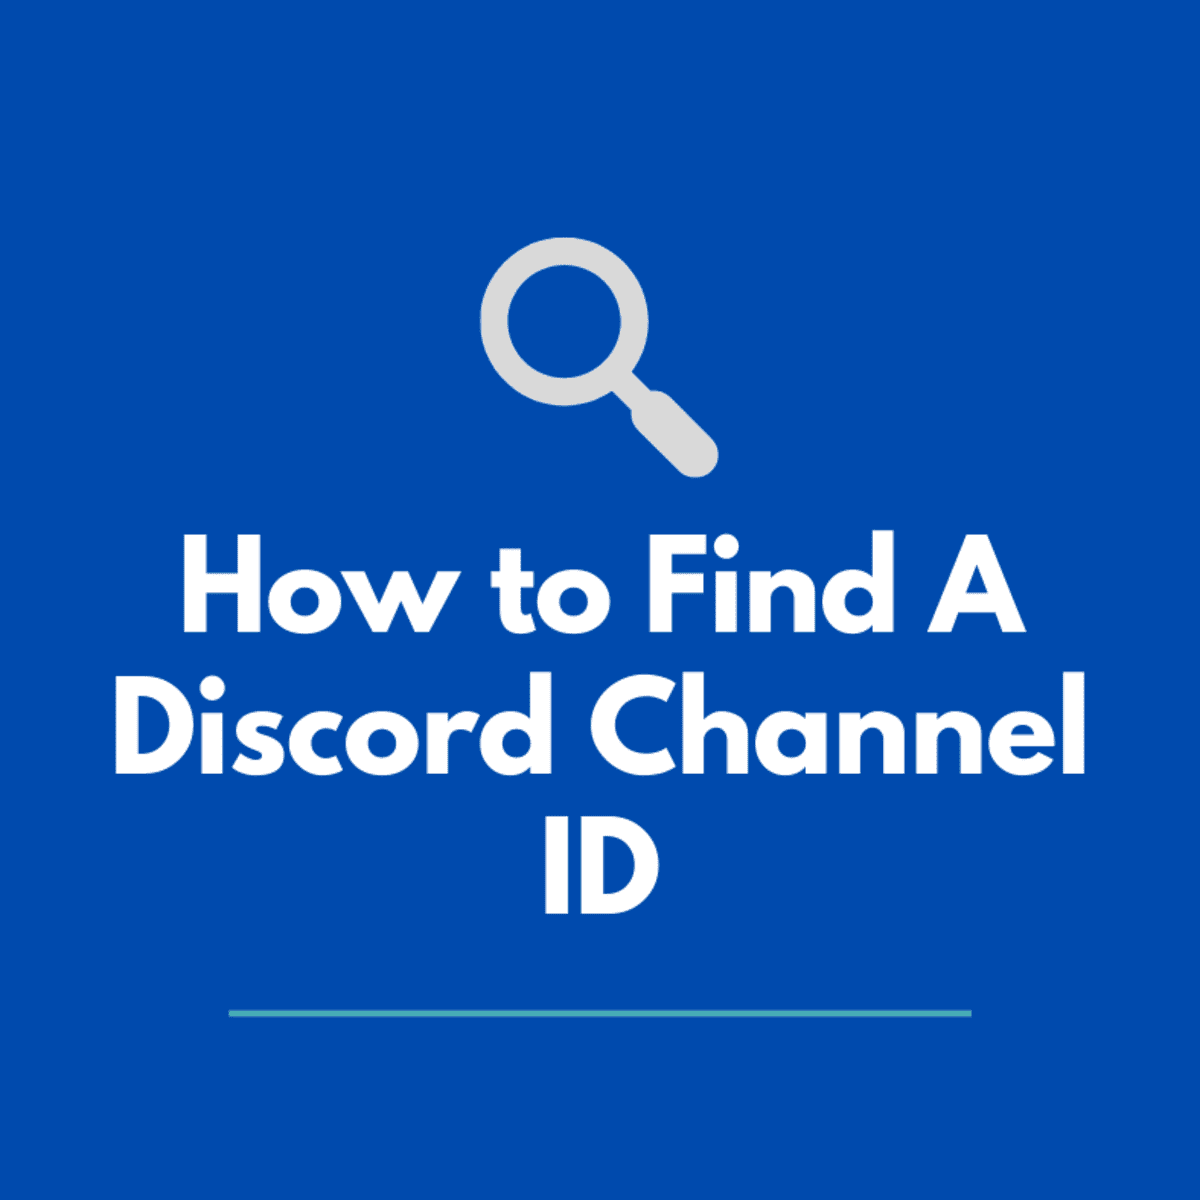 How to Play Discord Channel Games (2022 Guide)